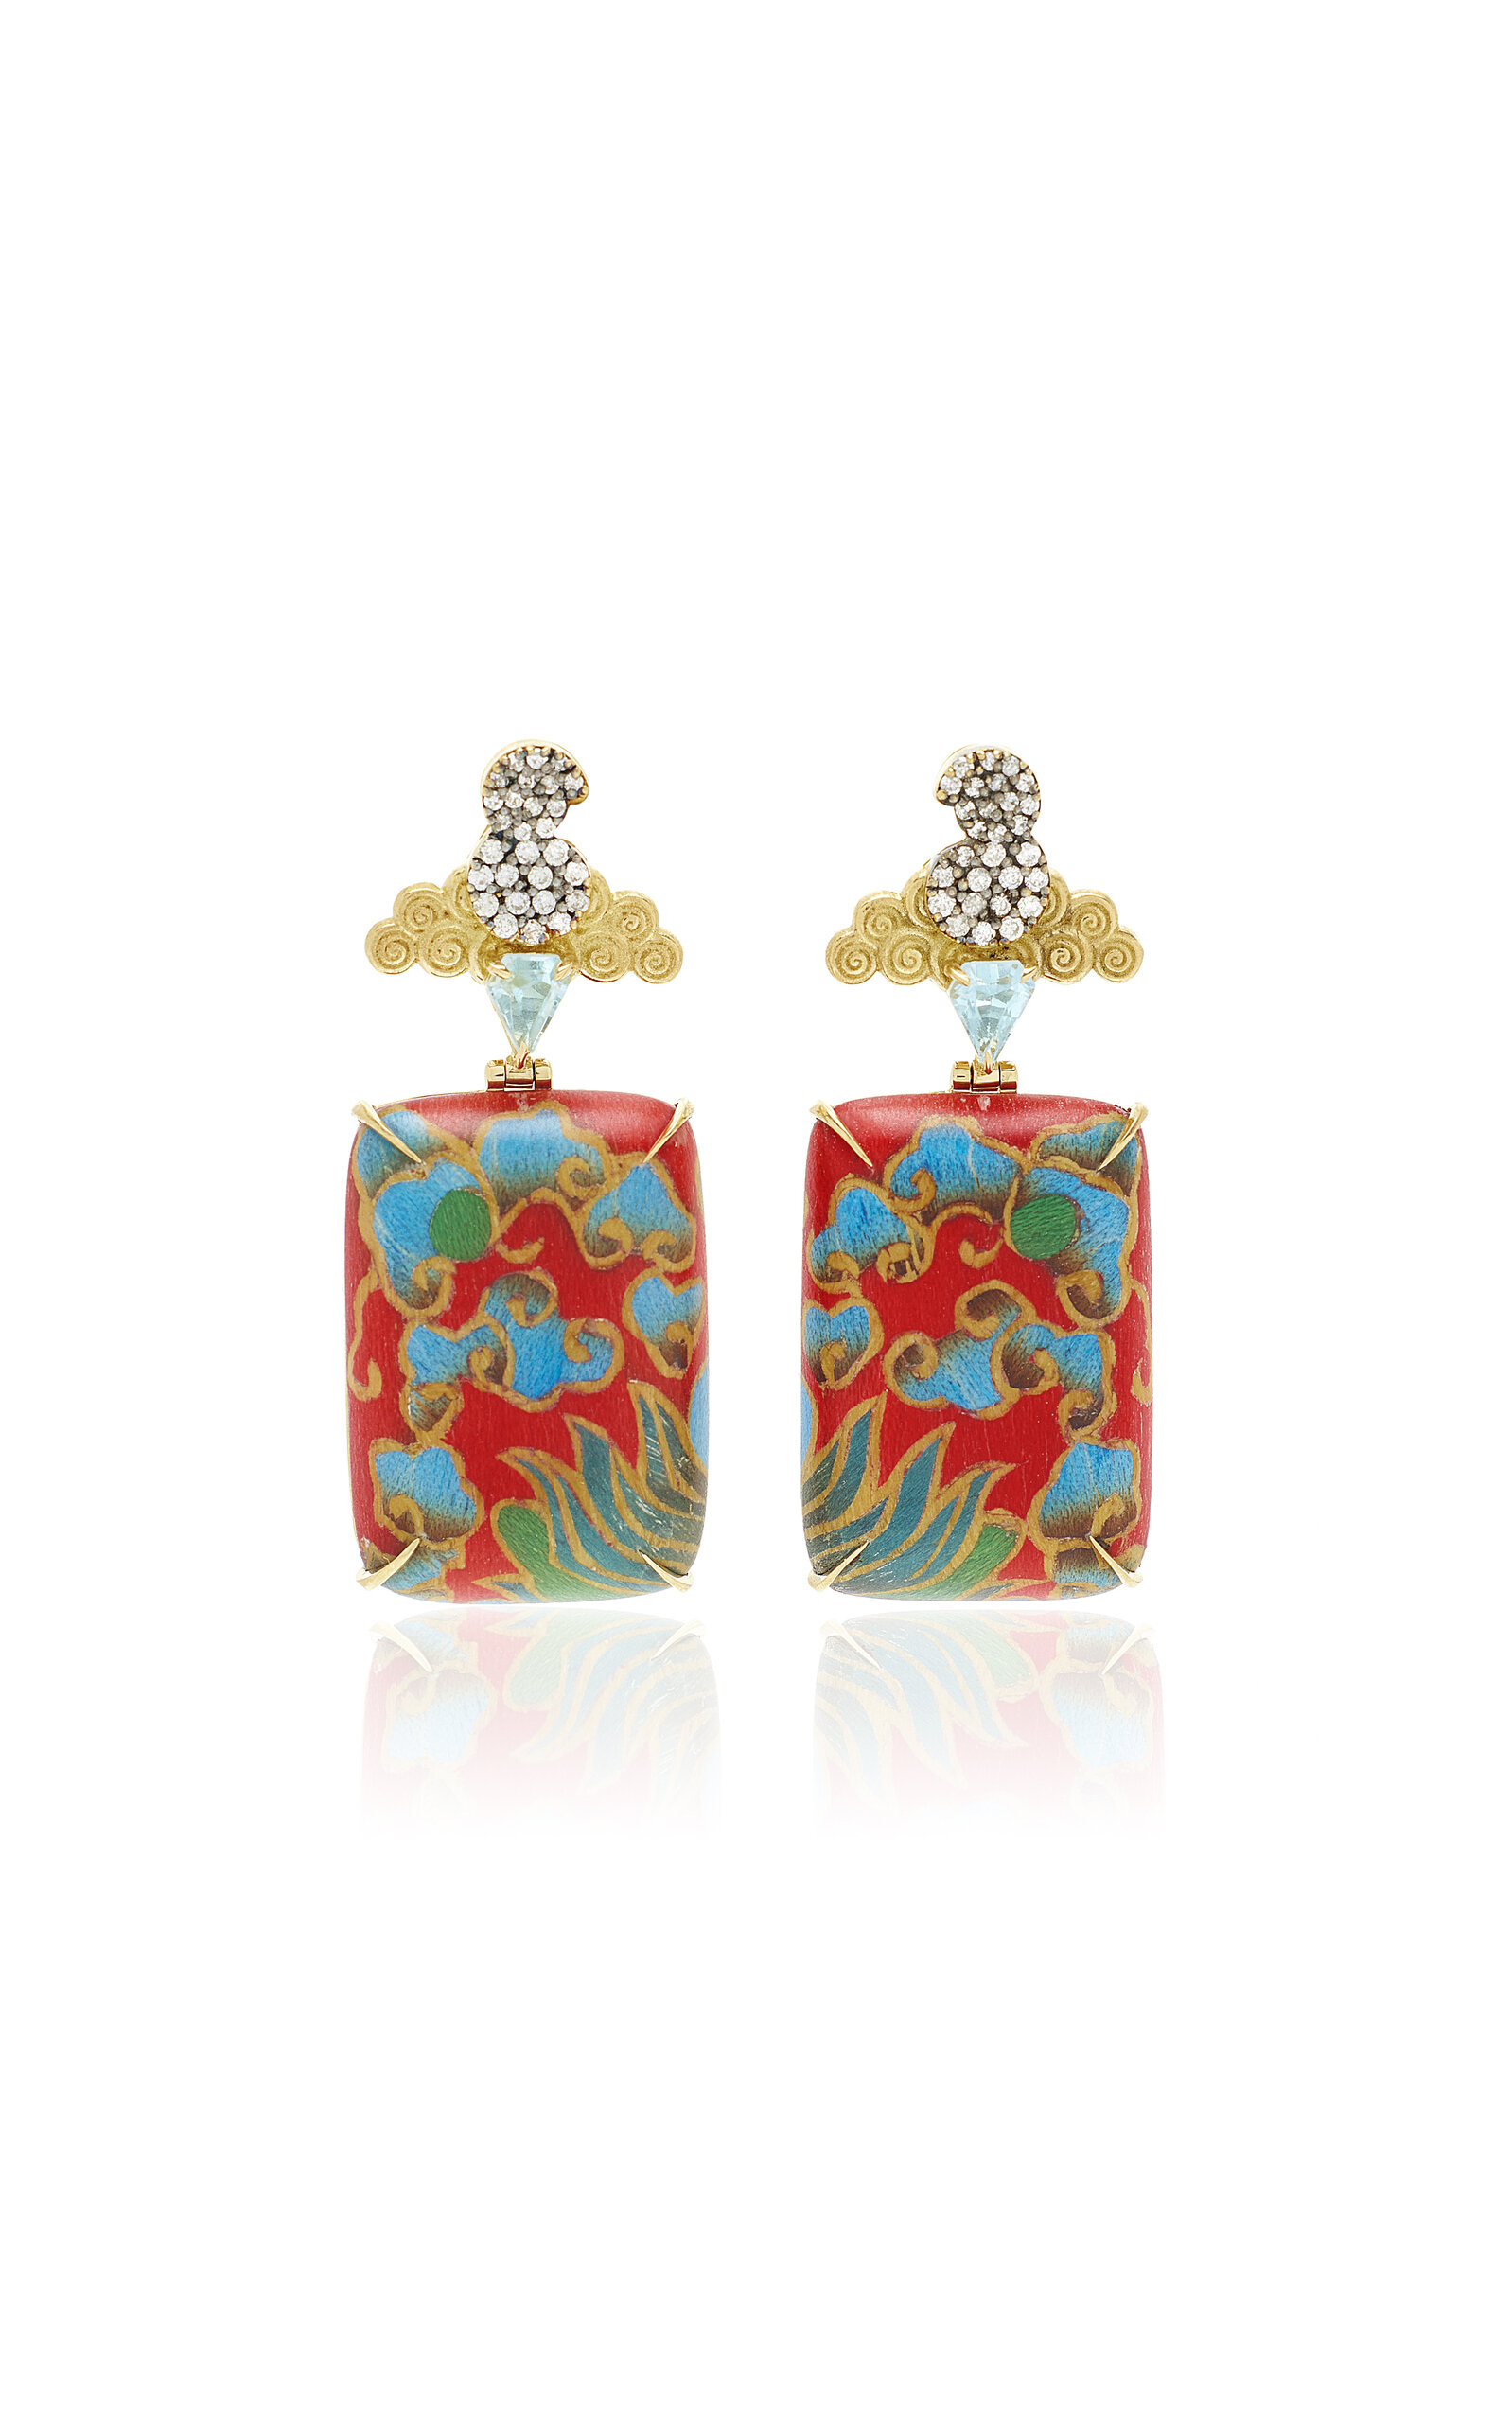 Silvia Furmanovich Marquetry 18k Yellow Gold; Diamond; And Blue Topaz Earrings In Red